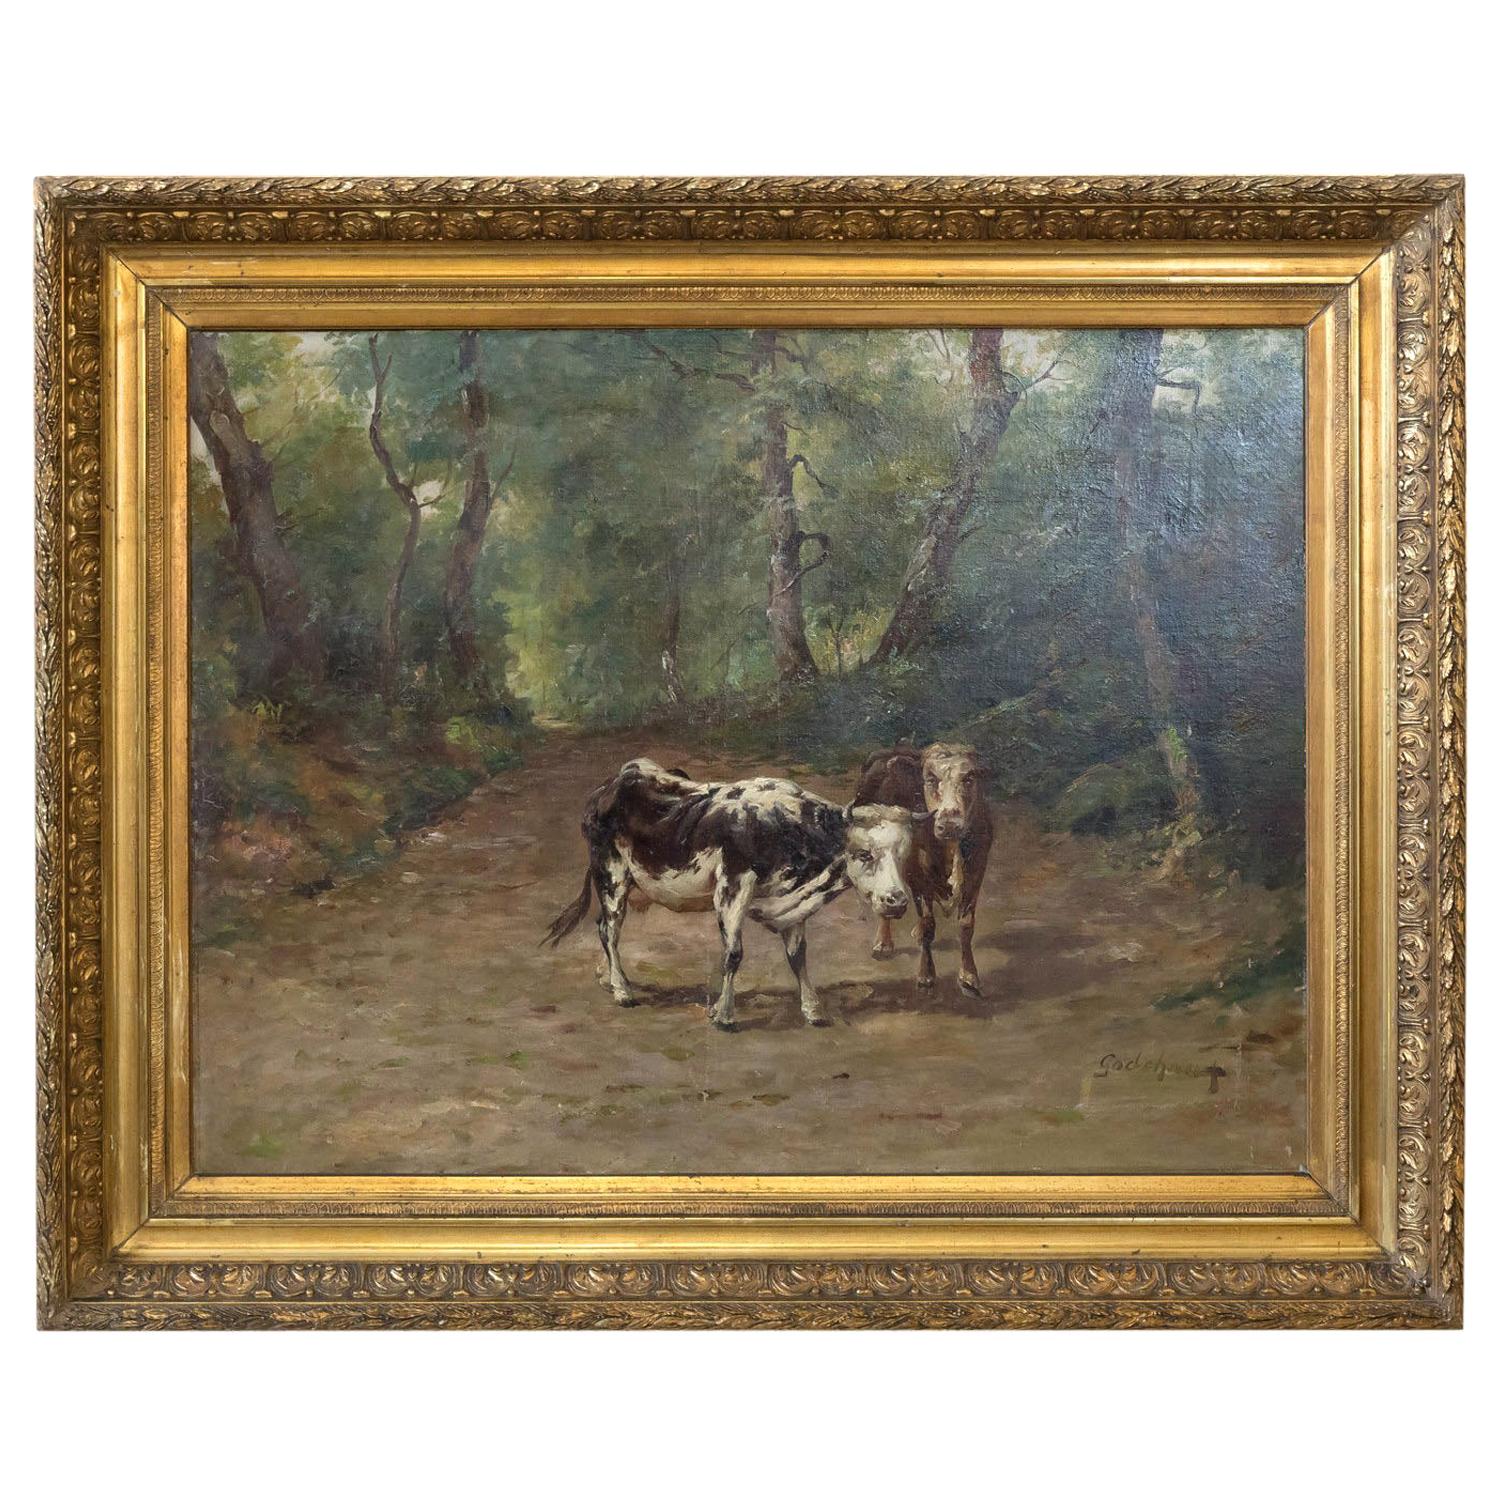 19th Century French Painting of Cows on a Forest Path by Emile Godchaux, Signed